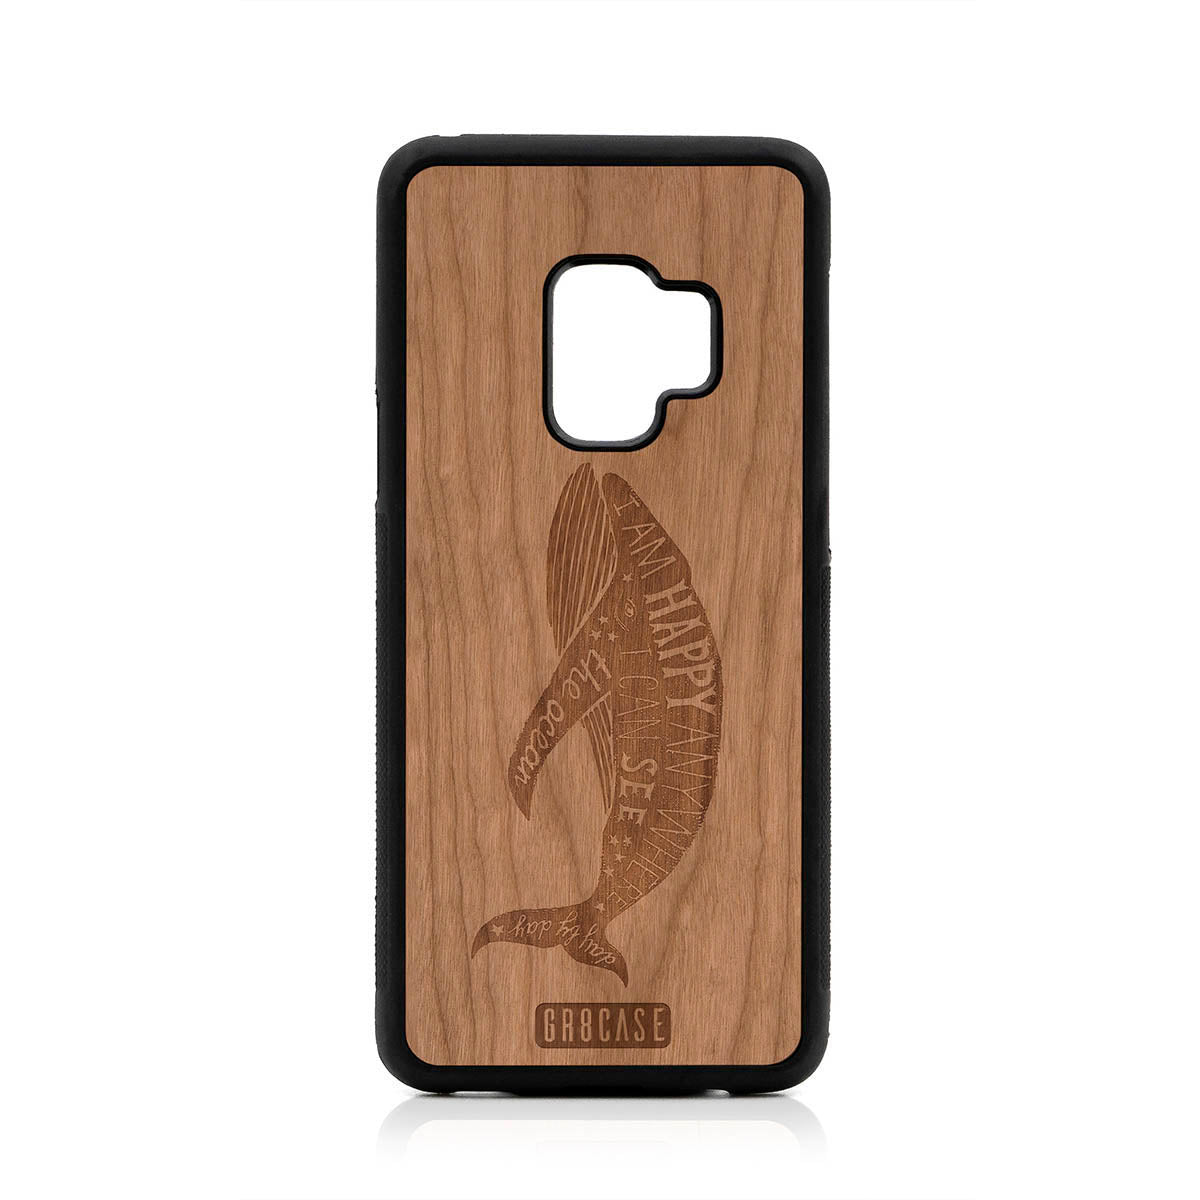 I'm Happy Anywhere I Can See The Ocean (Whale) Design Wood Case For Samsung Galaxy S9